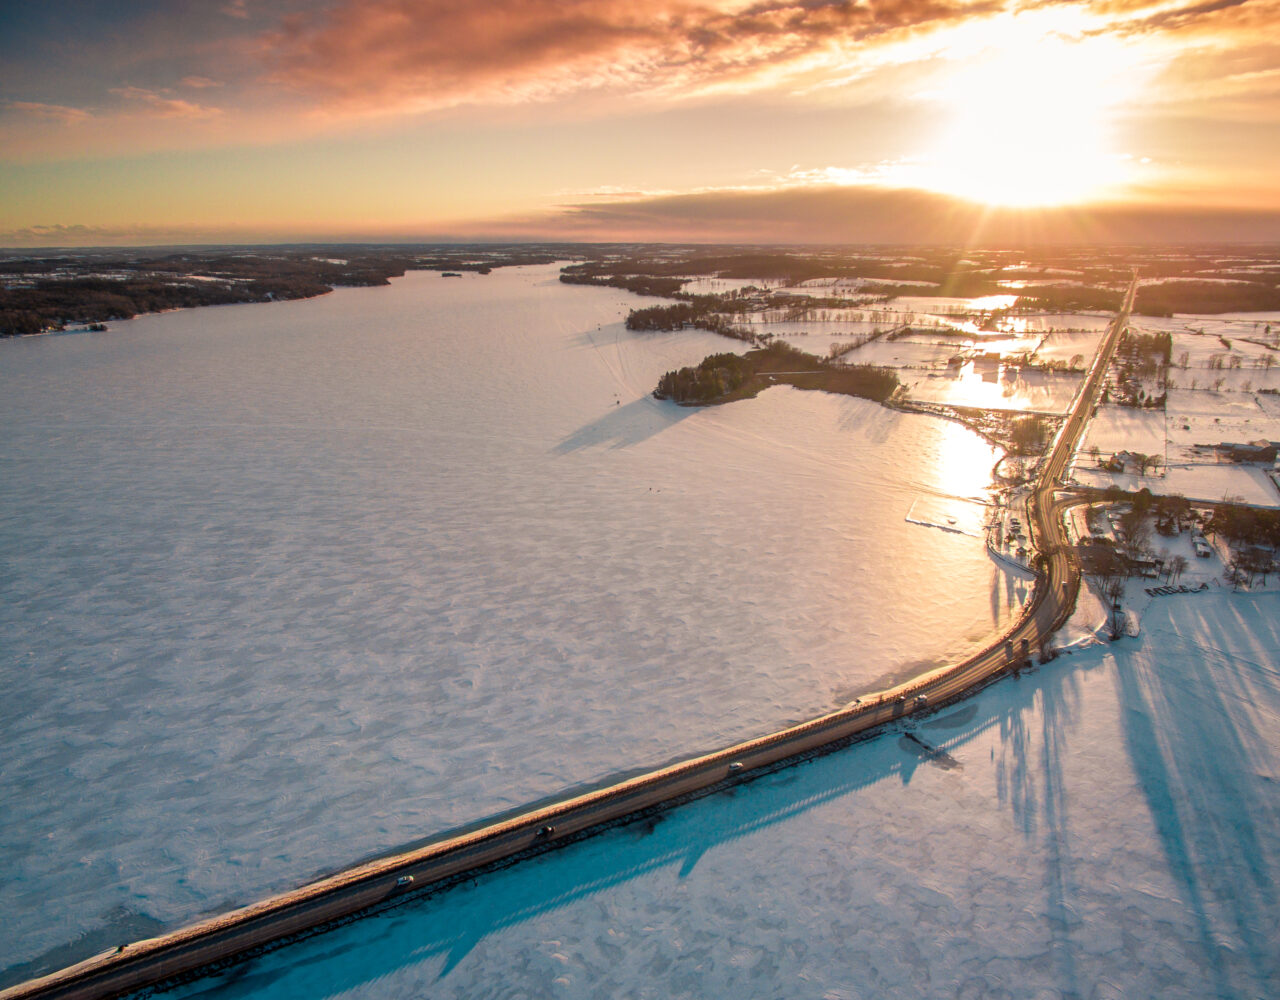 Aerial image of frozen lake with Bridgenorth Causeway in the middle. Sunset in the background